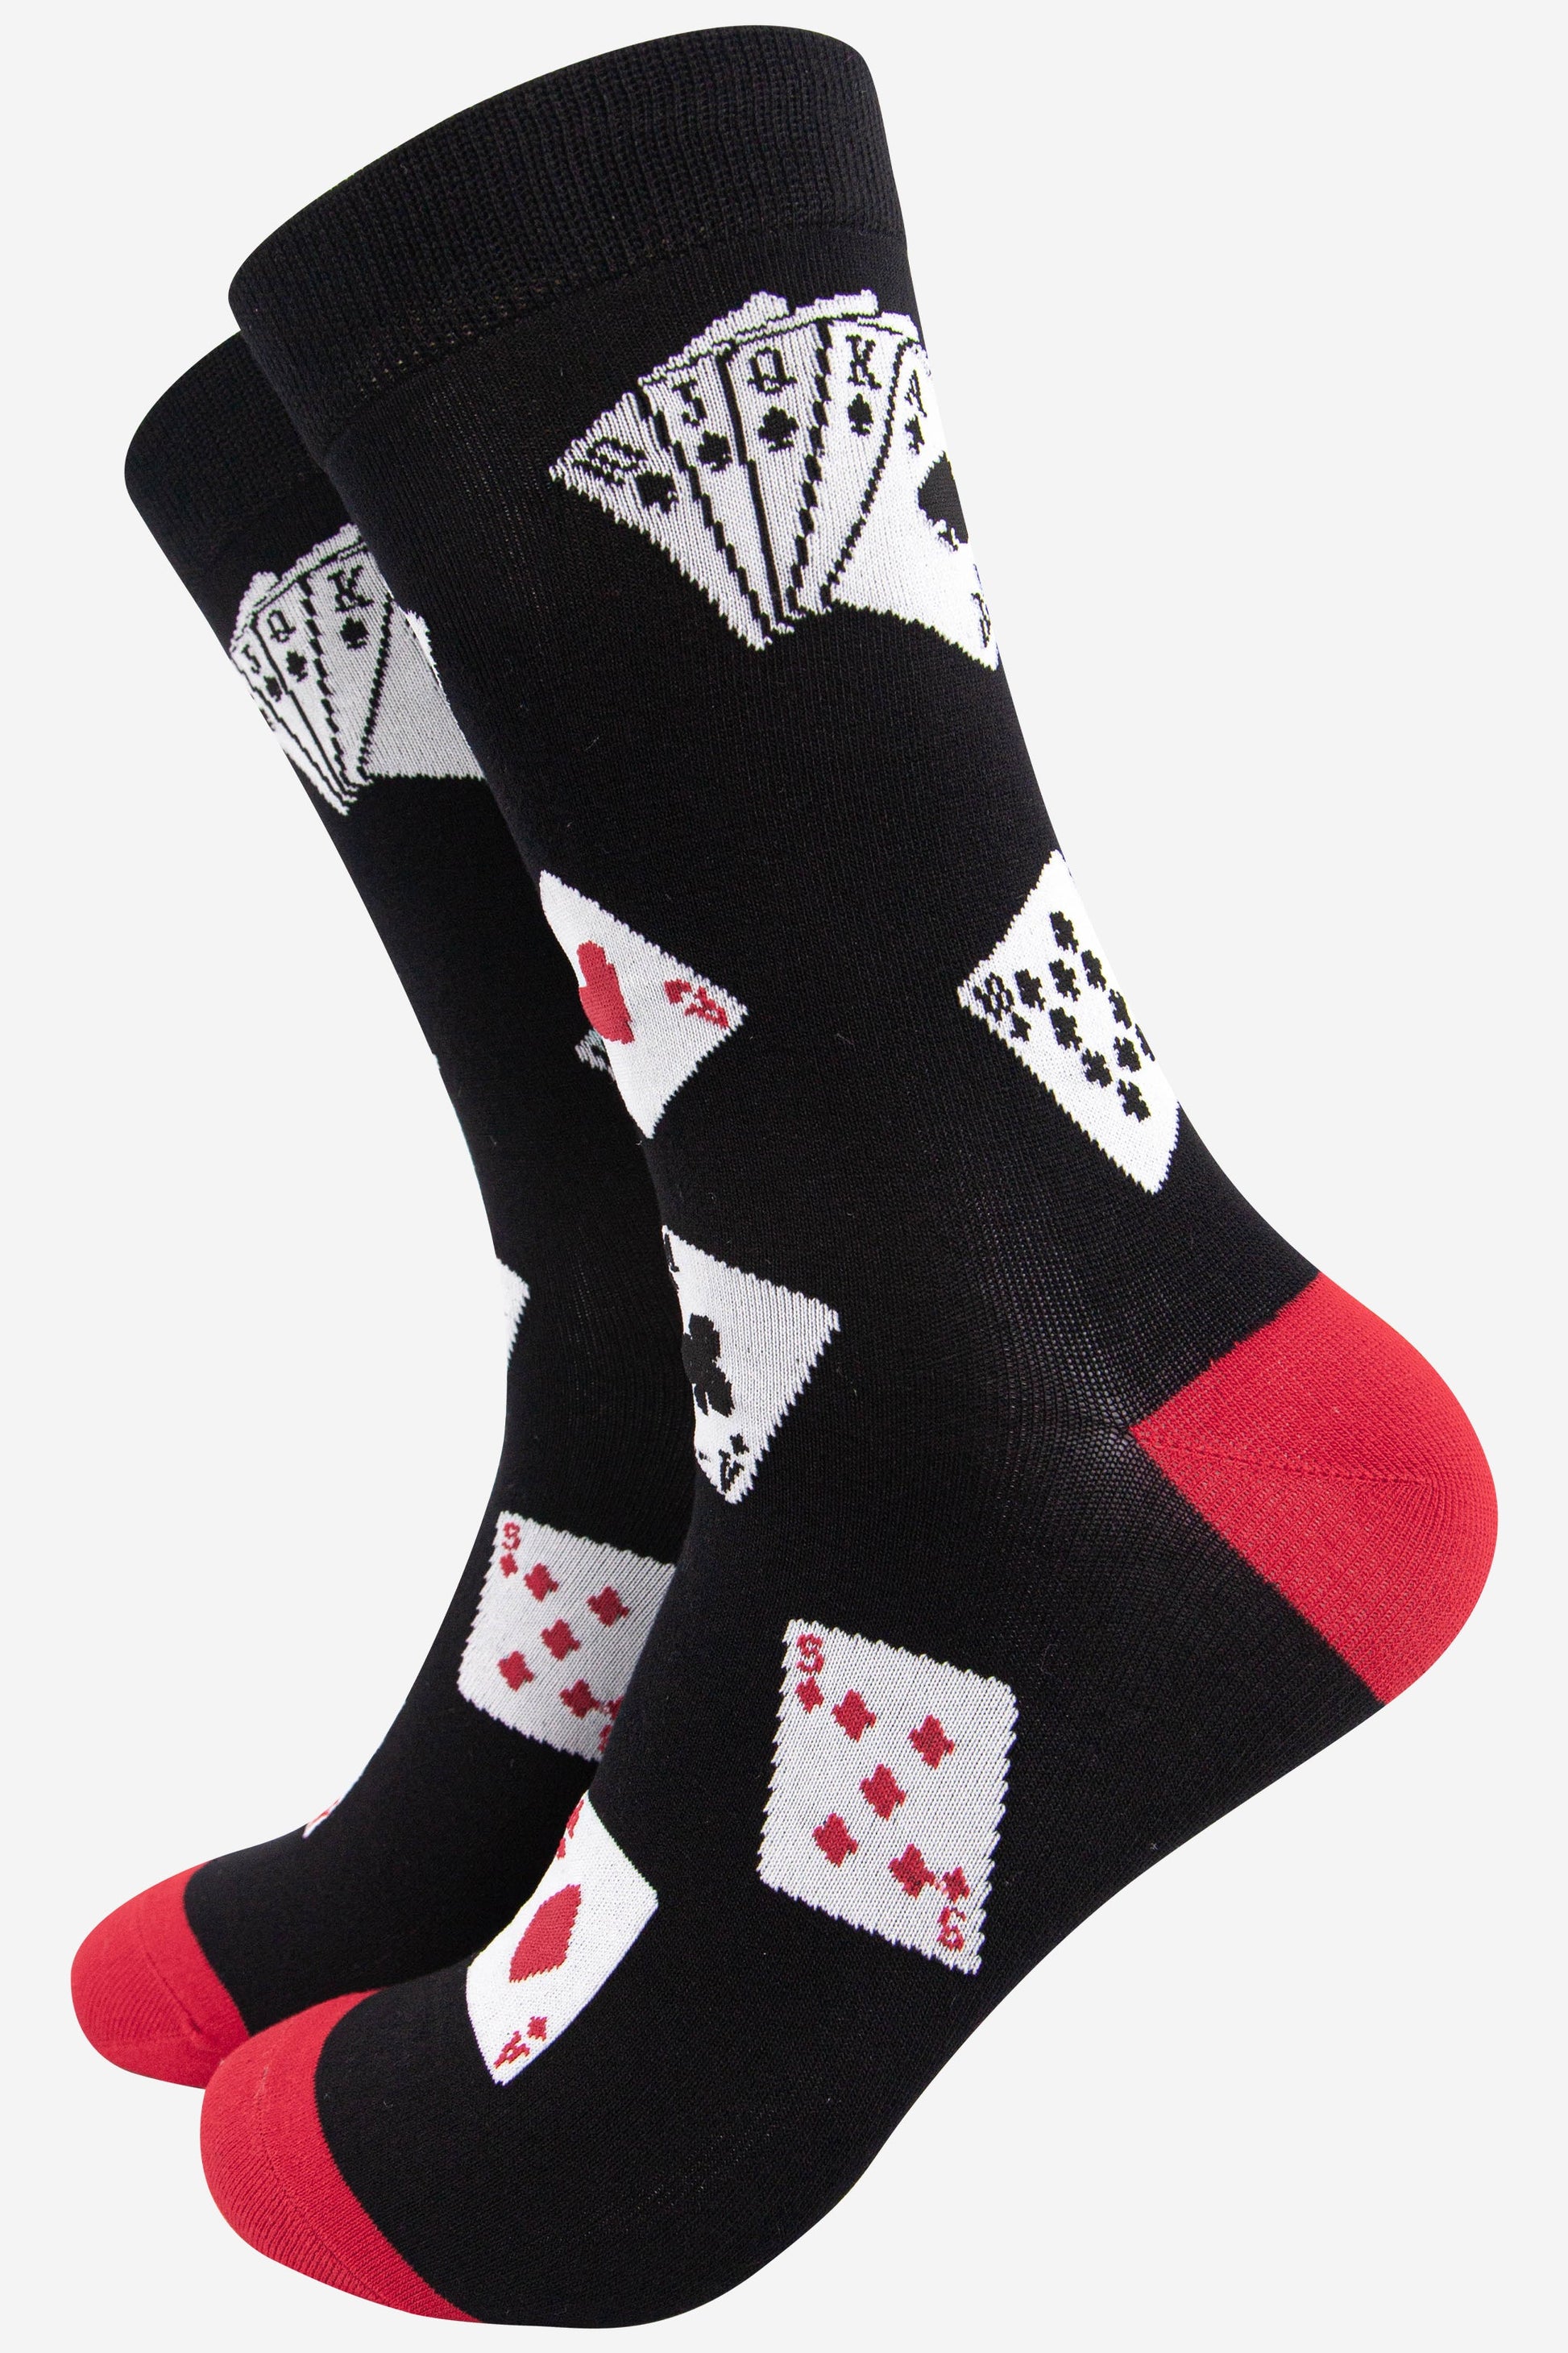 black and red dress socks with poker playing cards on them